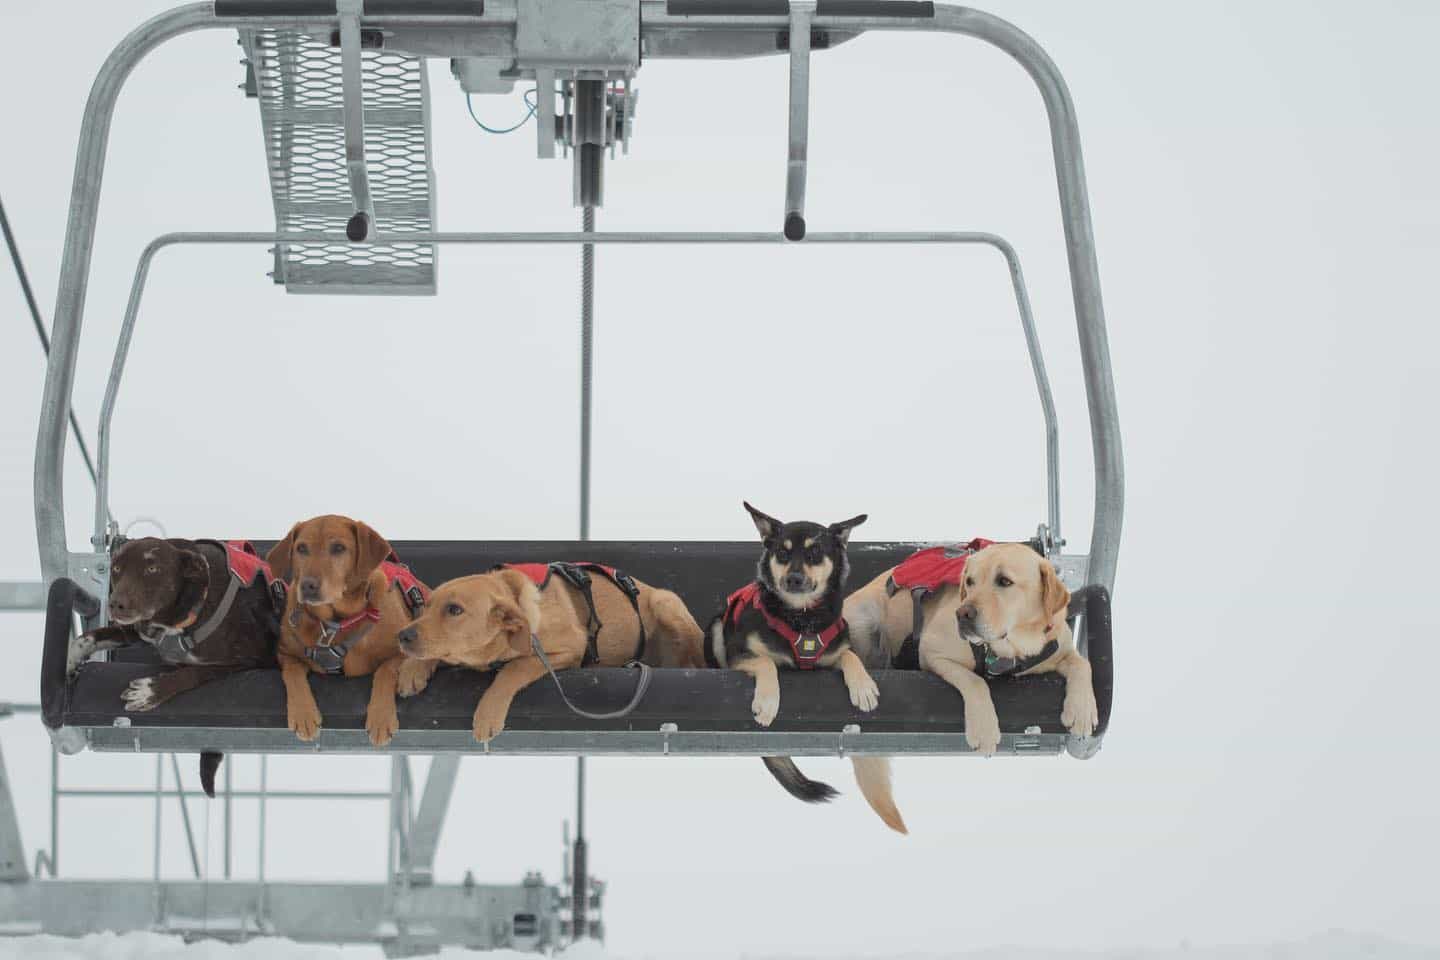 Avalanche dogs: complex training for rescue at high altitude